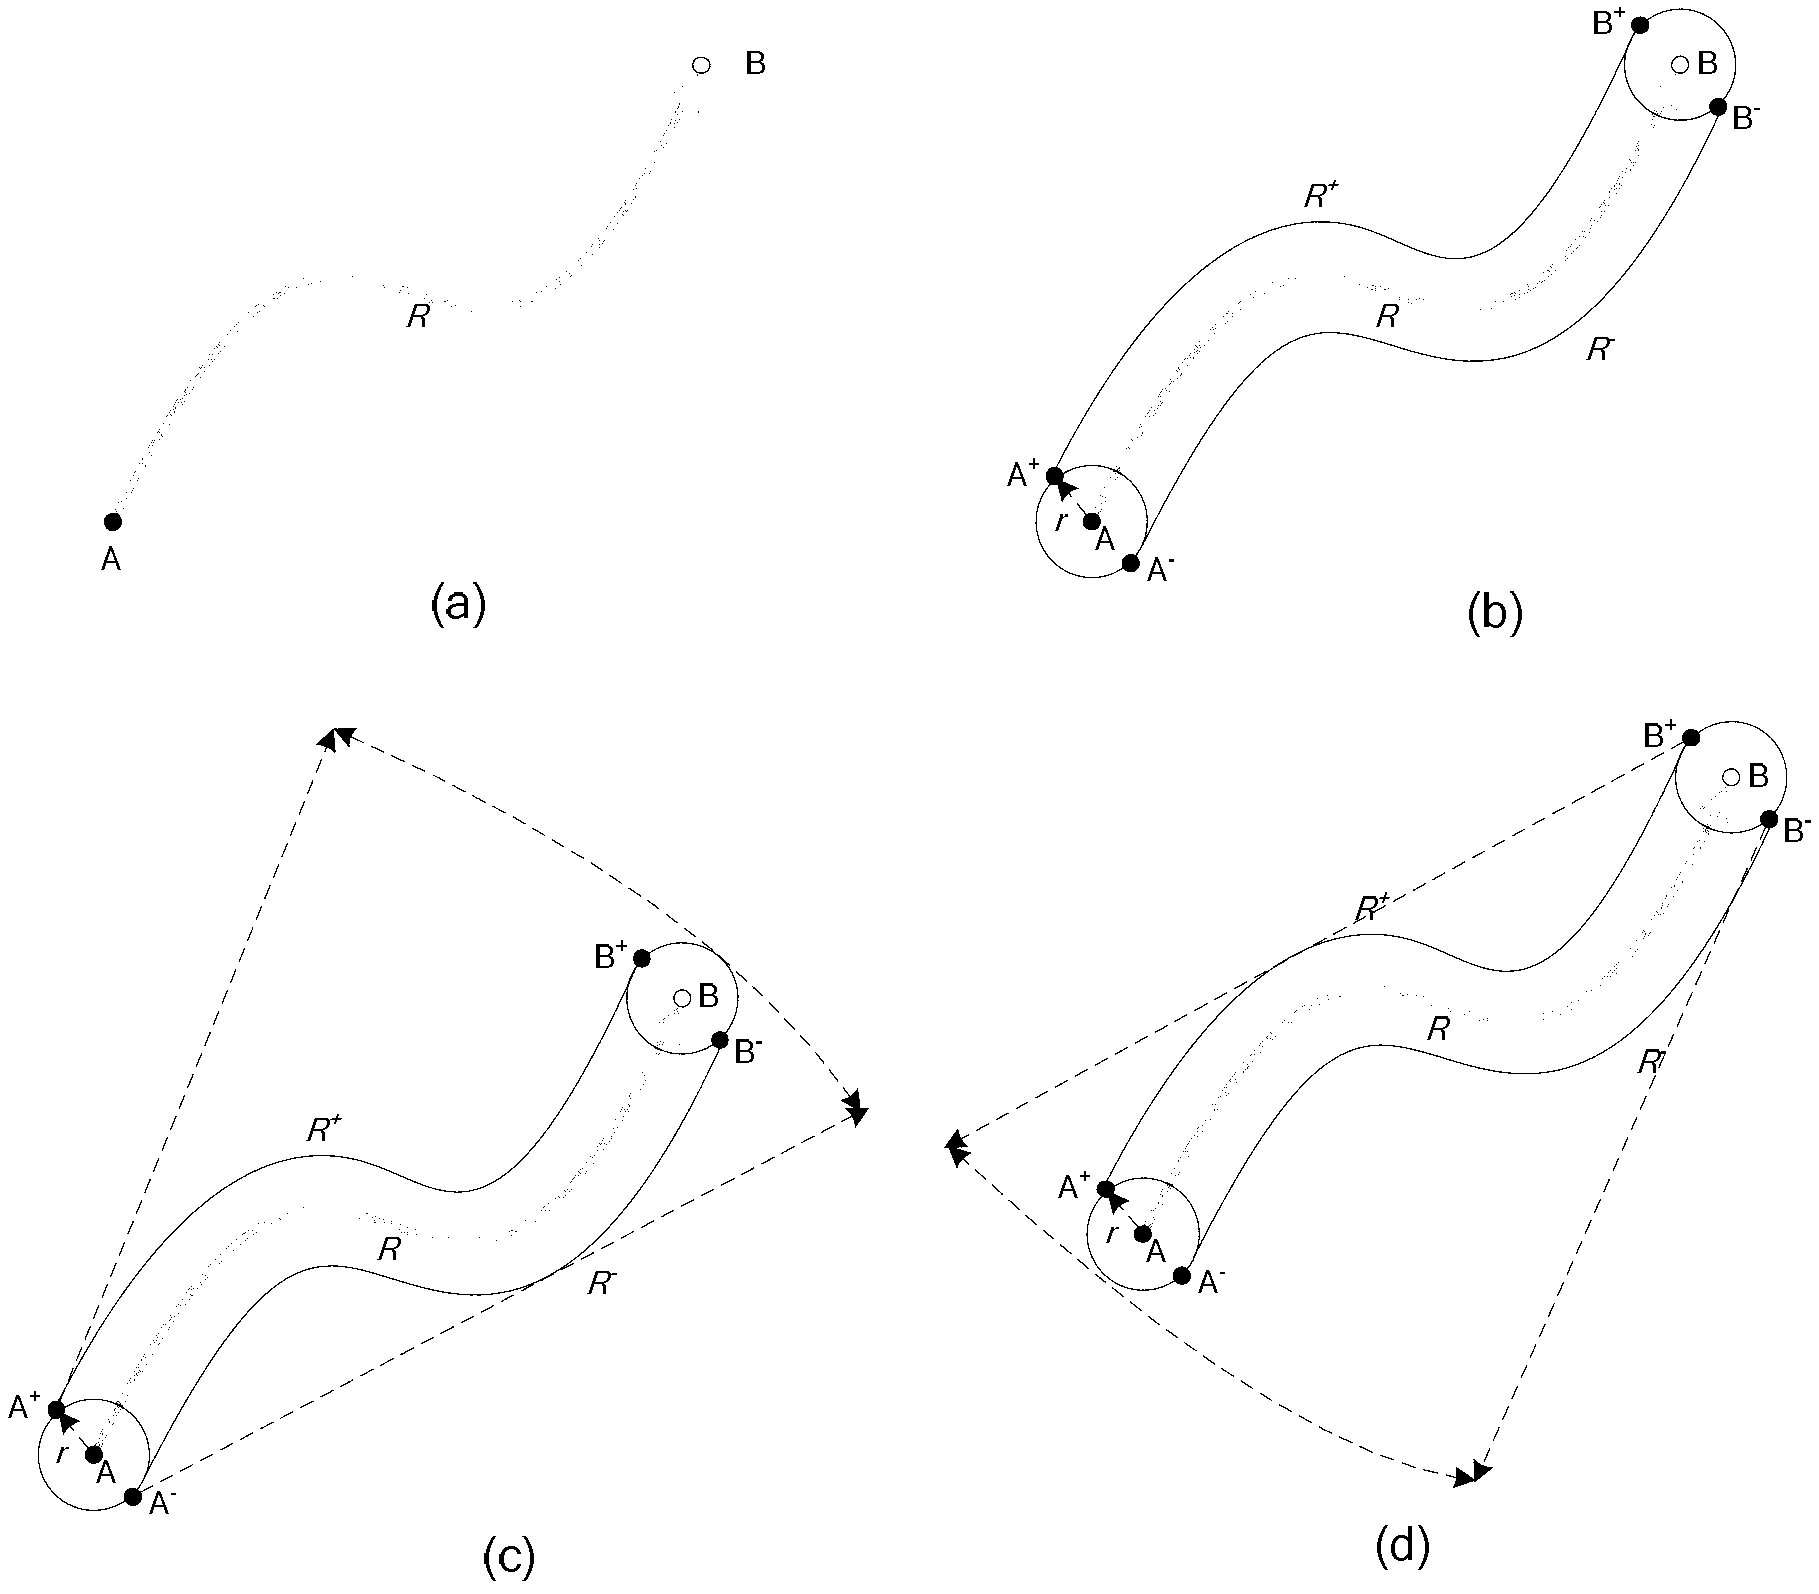 Light-weight map matching method based on simplified map model